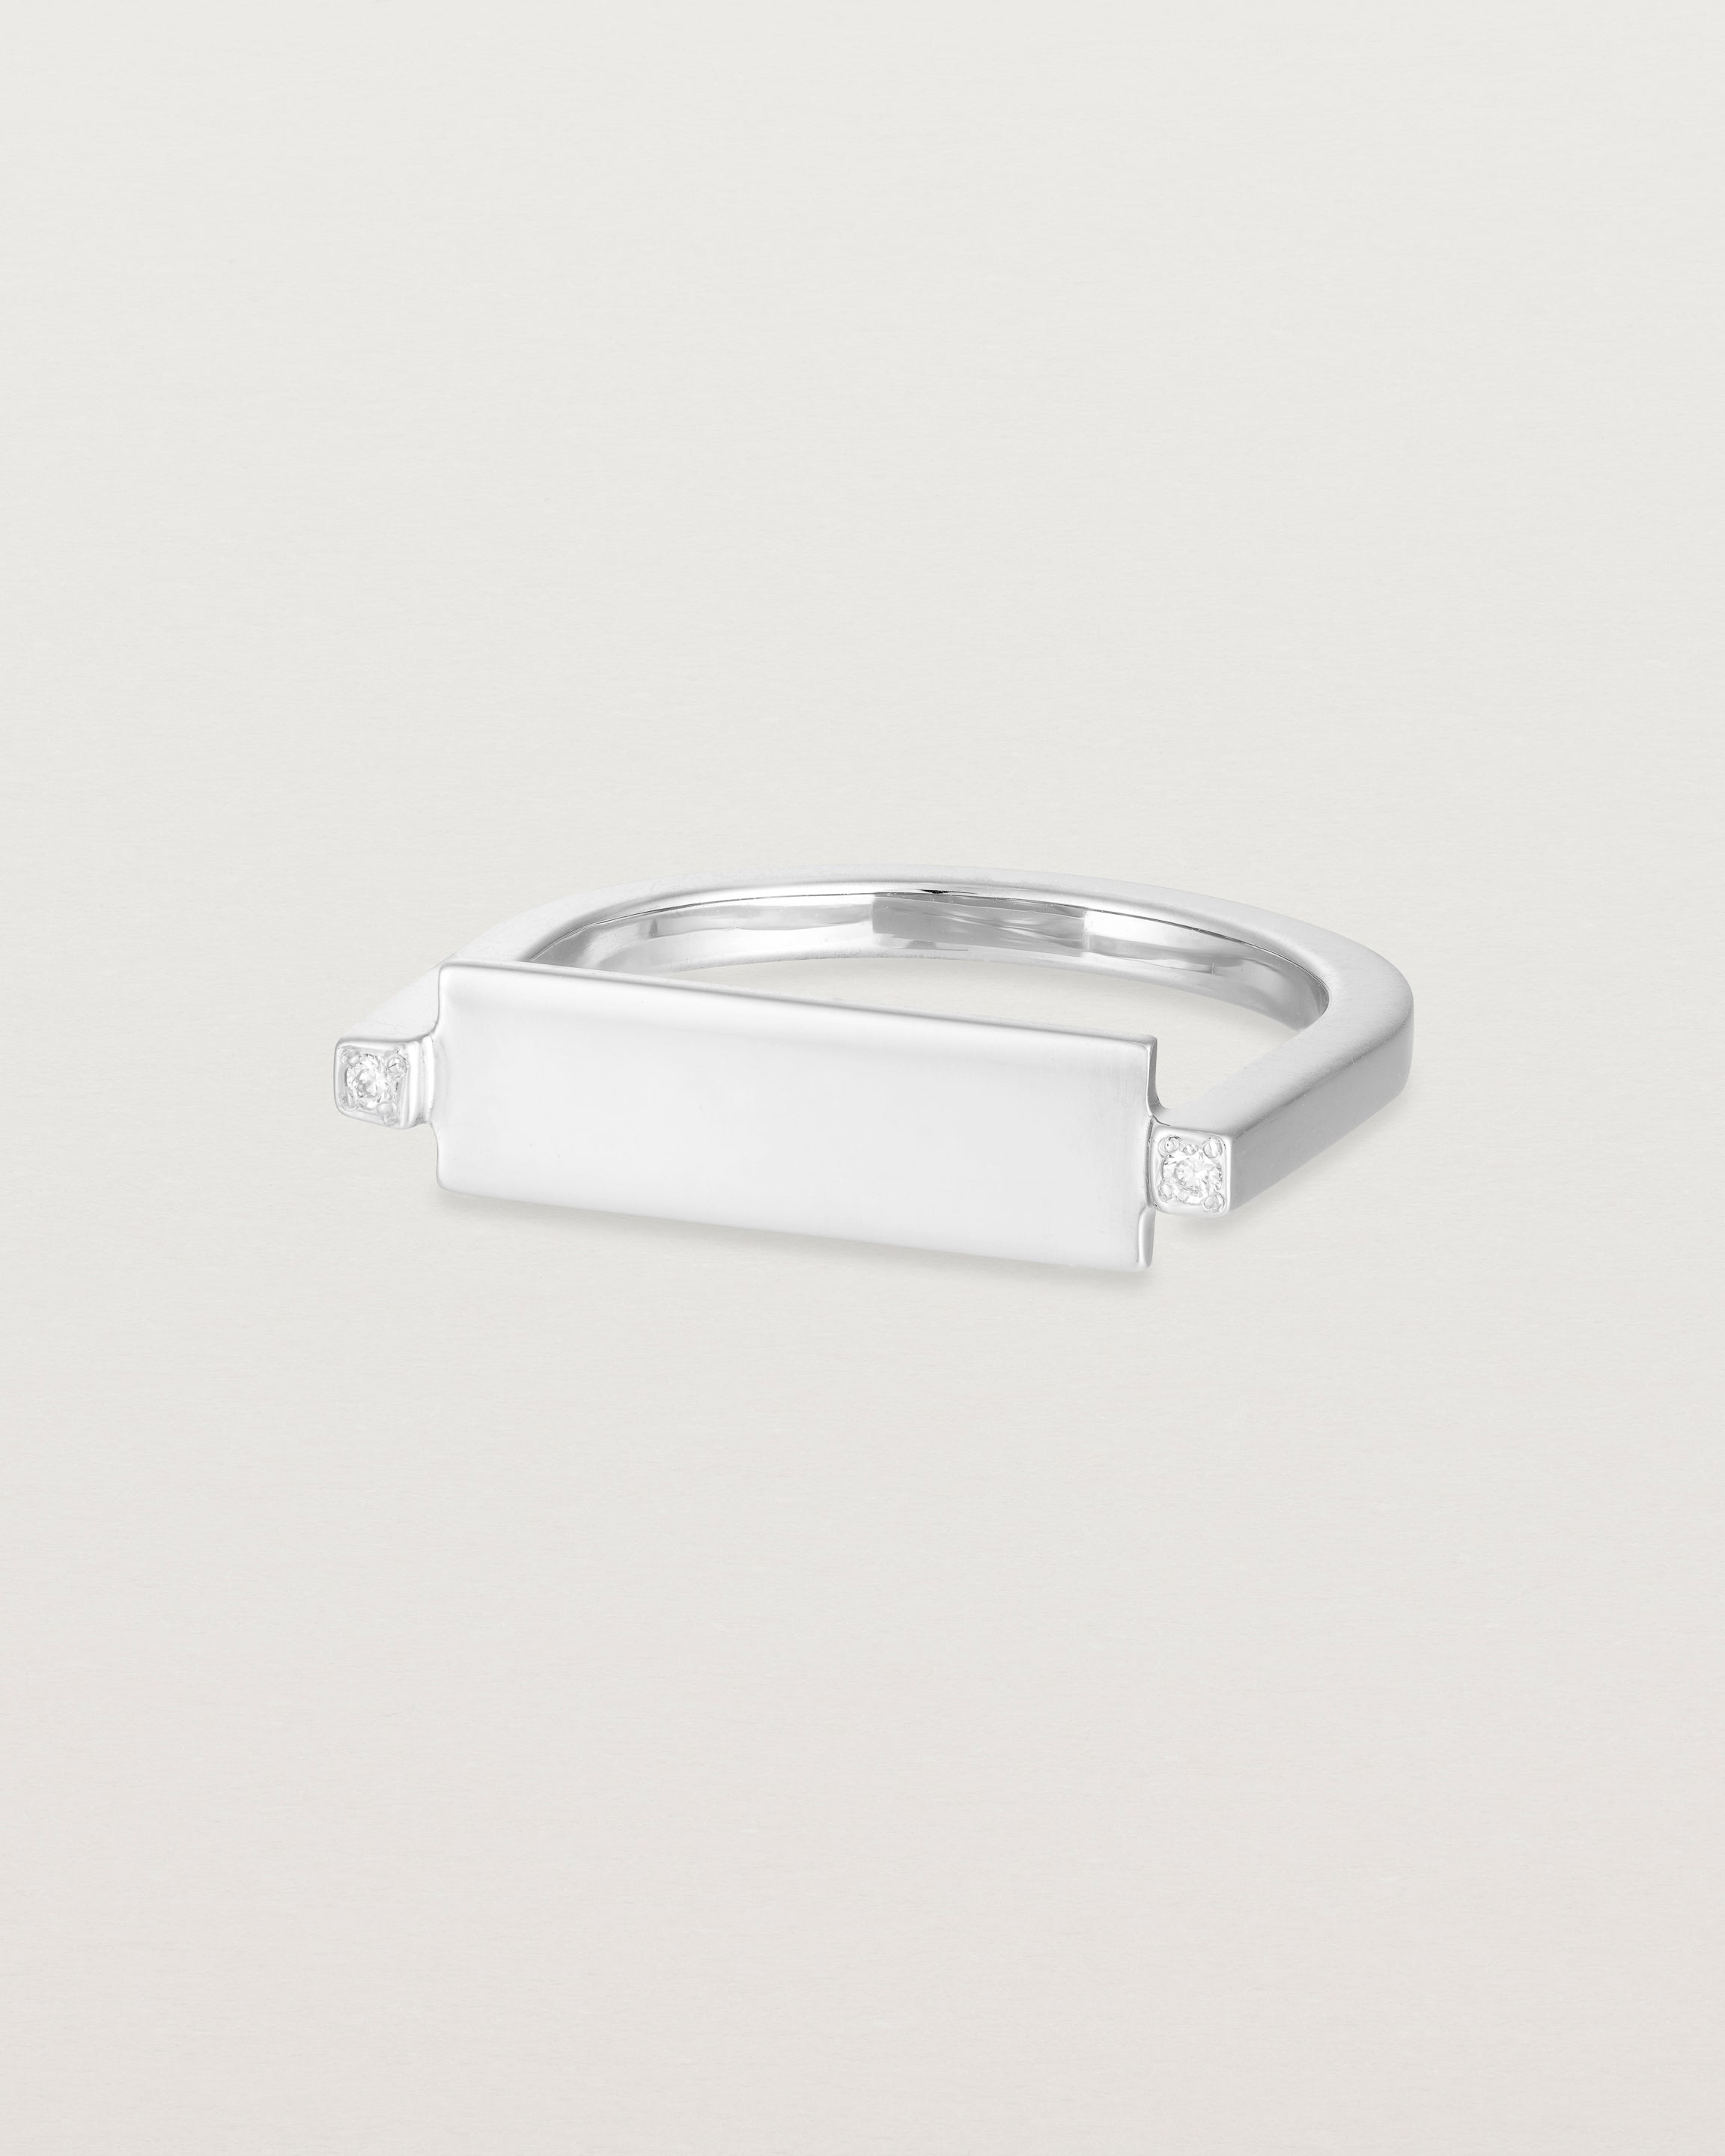 Angled view of the Antares Plate Ring | Diamonds | White Gold.